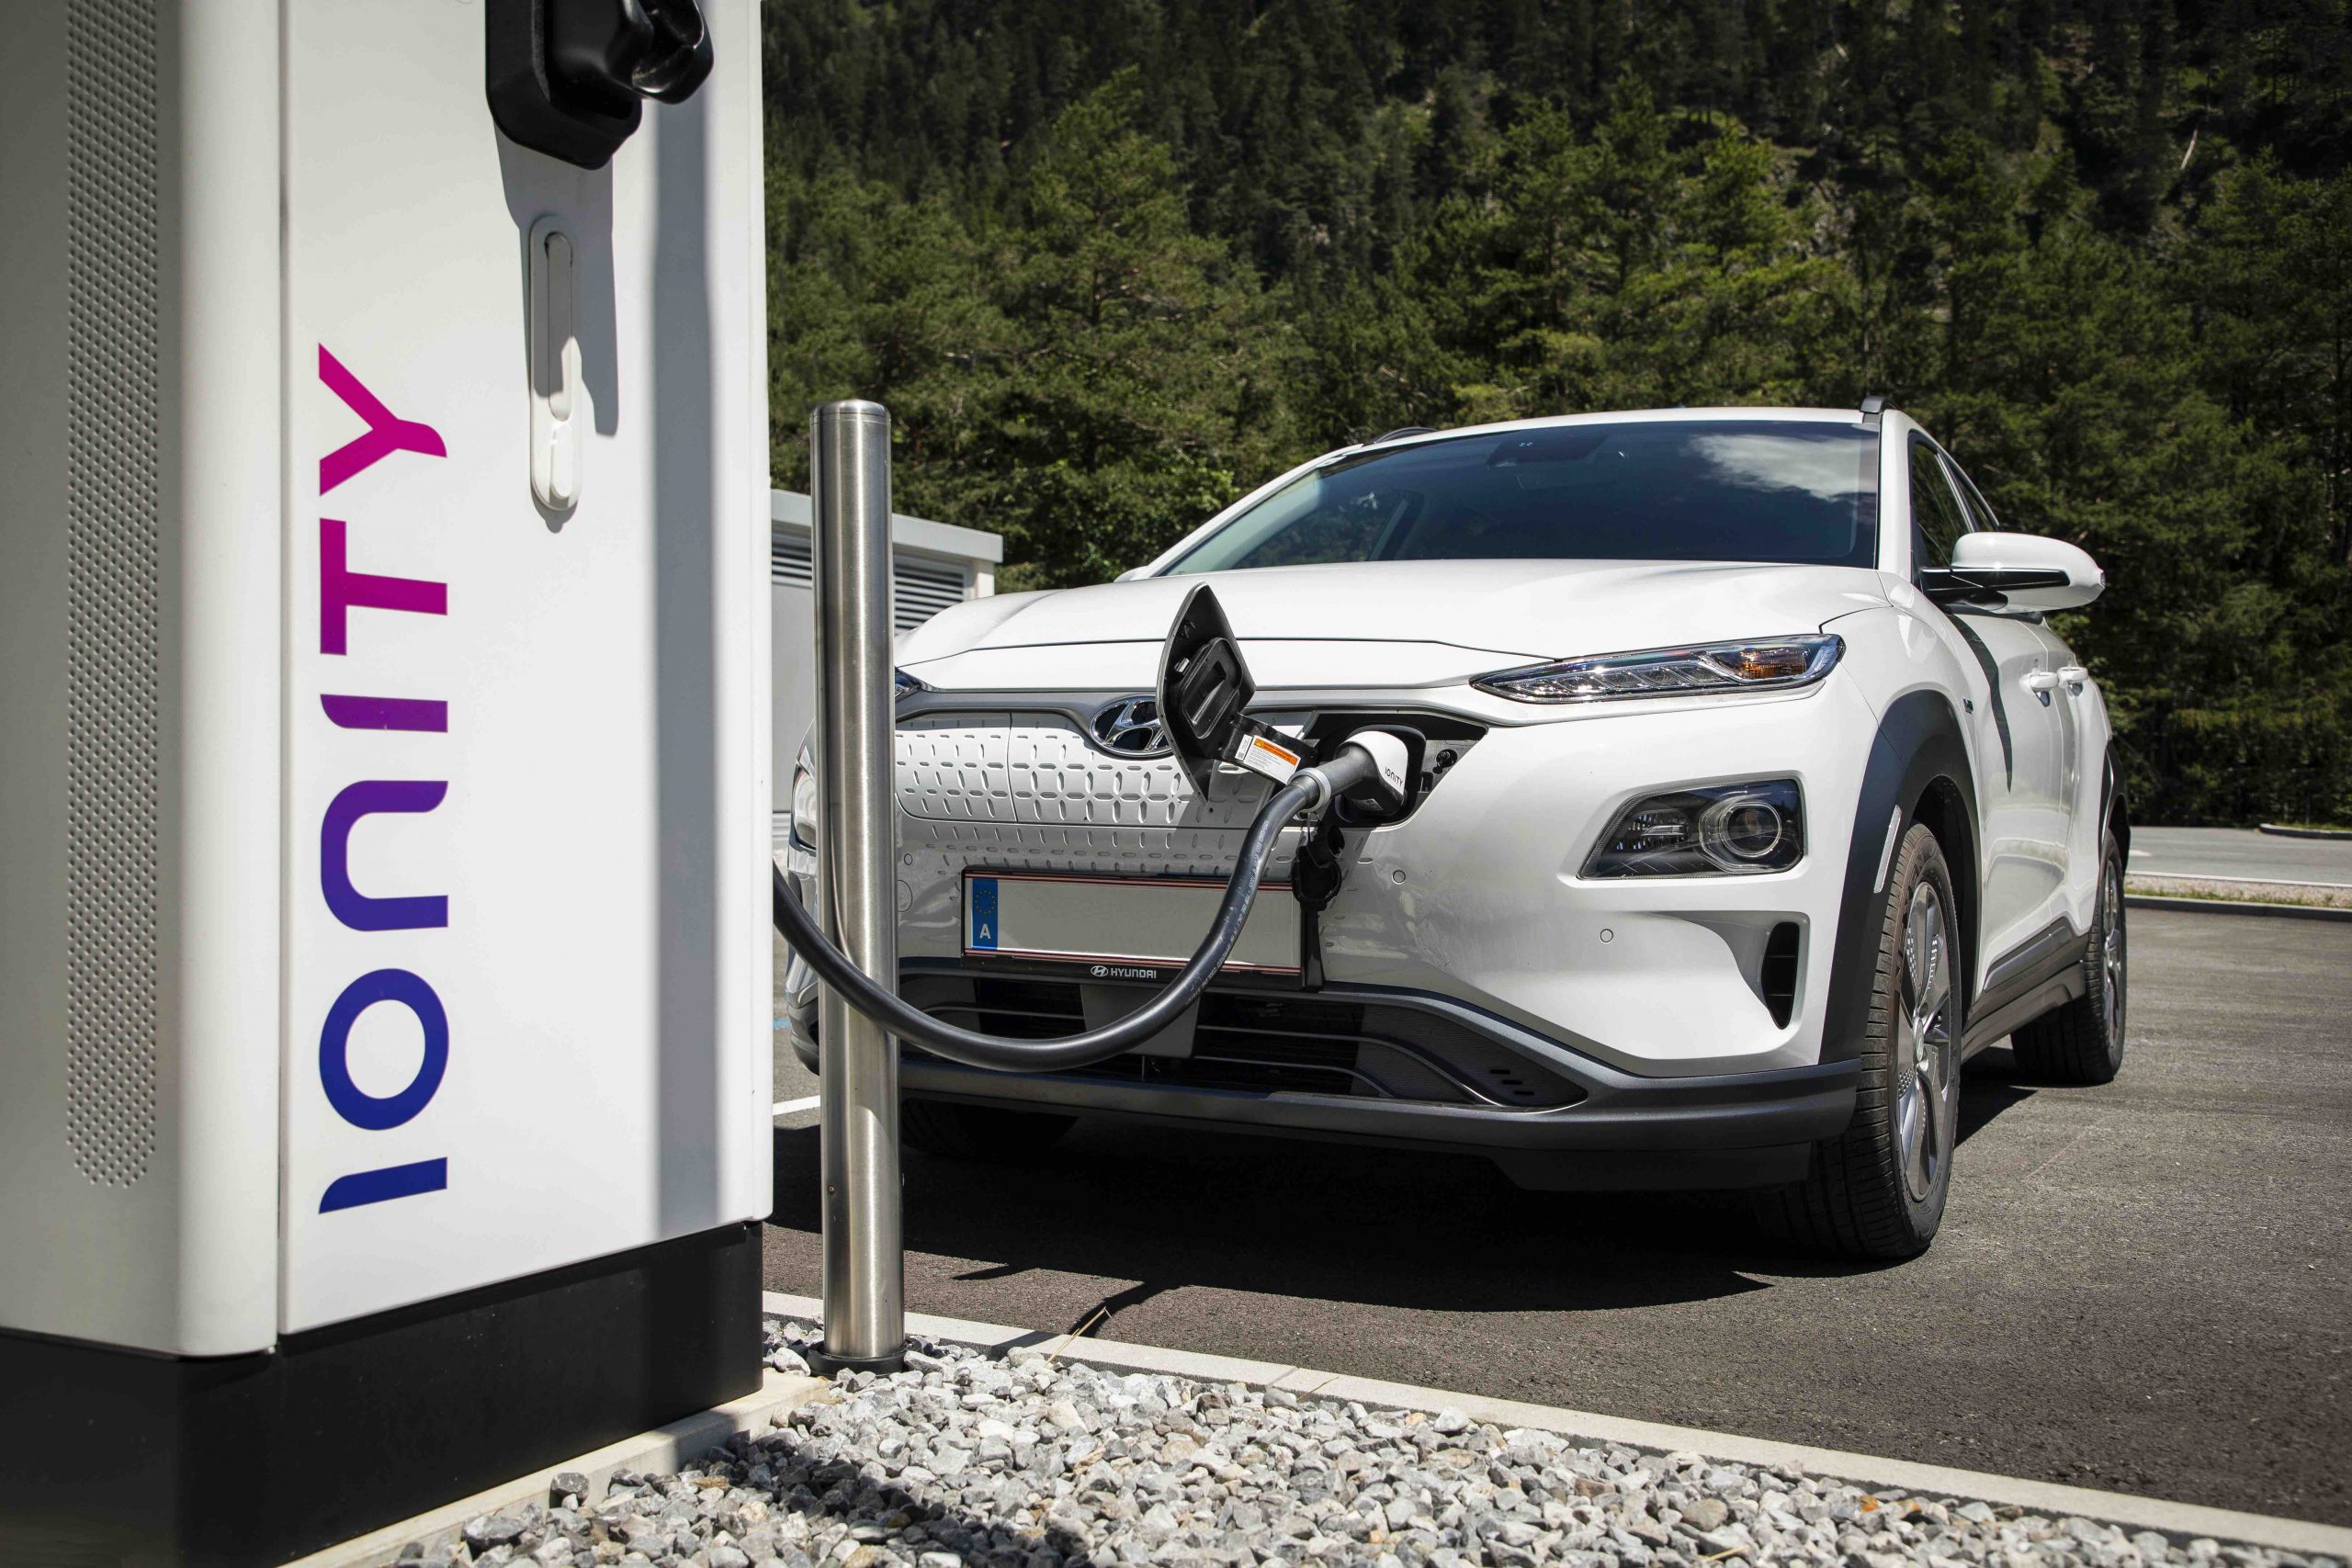 EU passes law to blanket highways with fast EV chargers by 2025